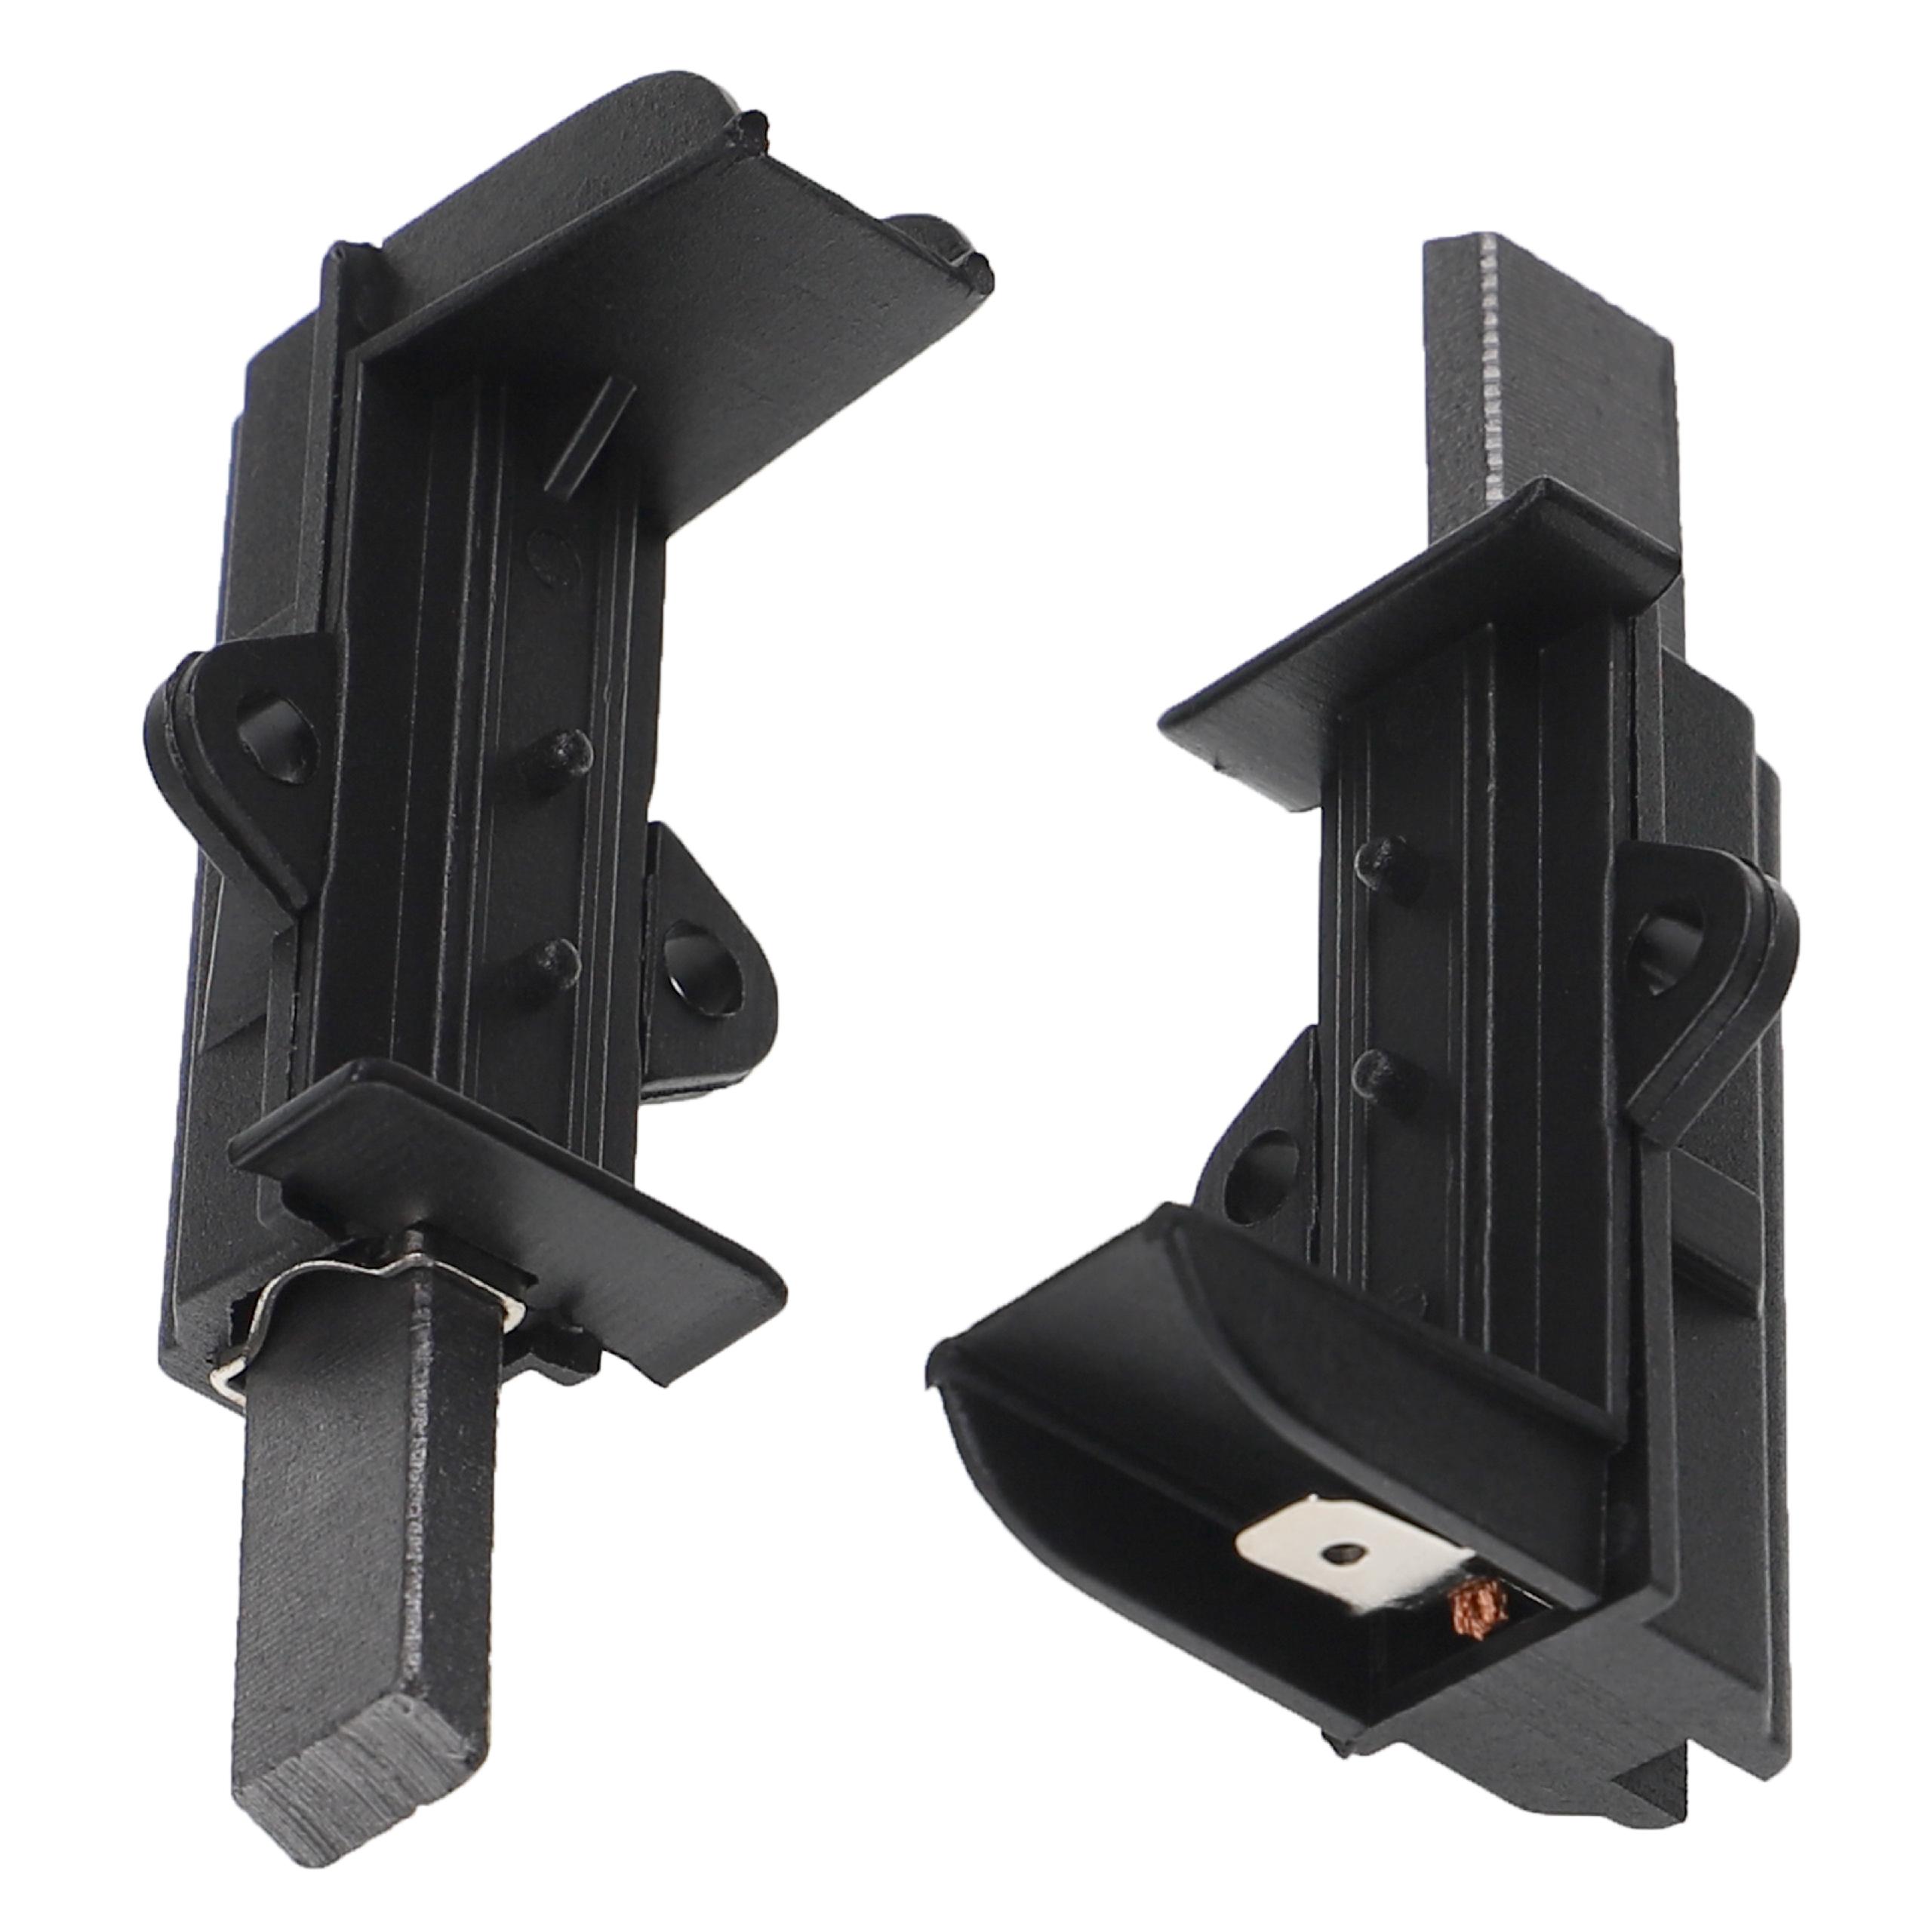 2x Carbon Brush as Replacement for 371201201, 371201202 Electric Power Tools + Holder, 5 x 12.5 x 32mm